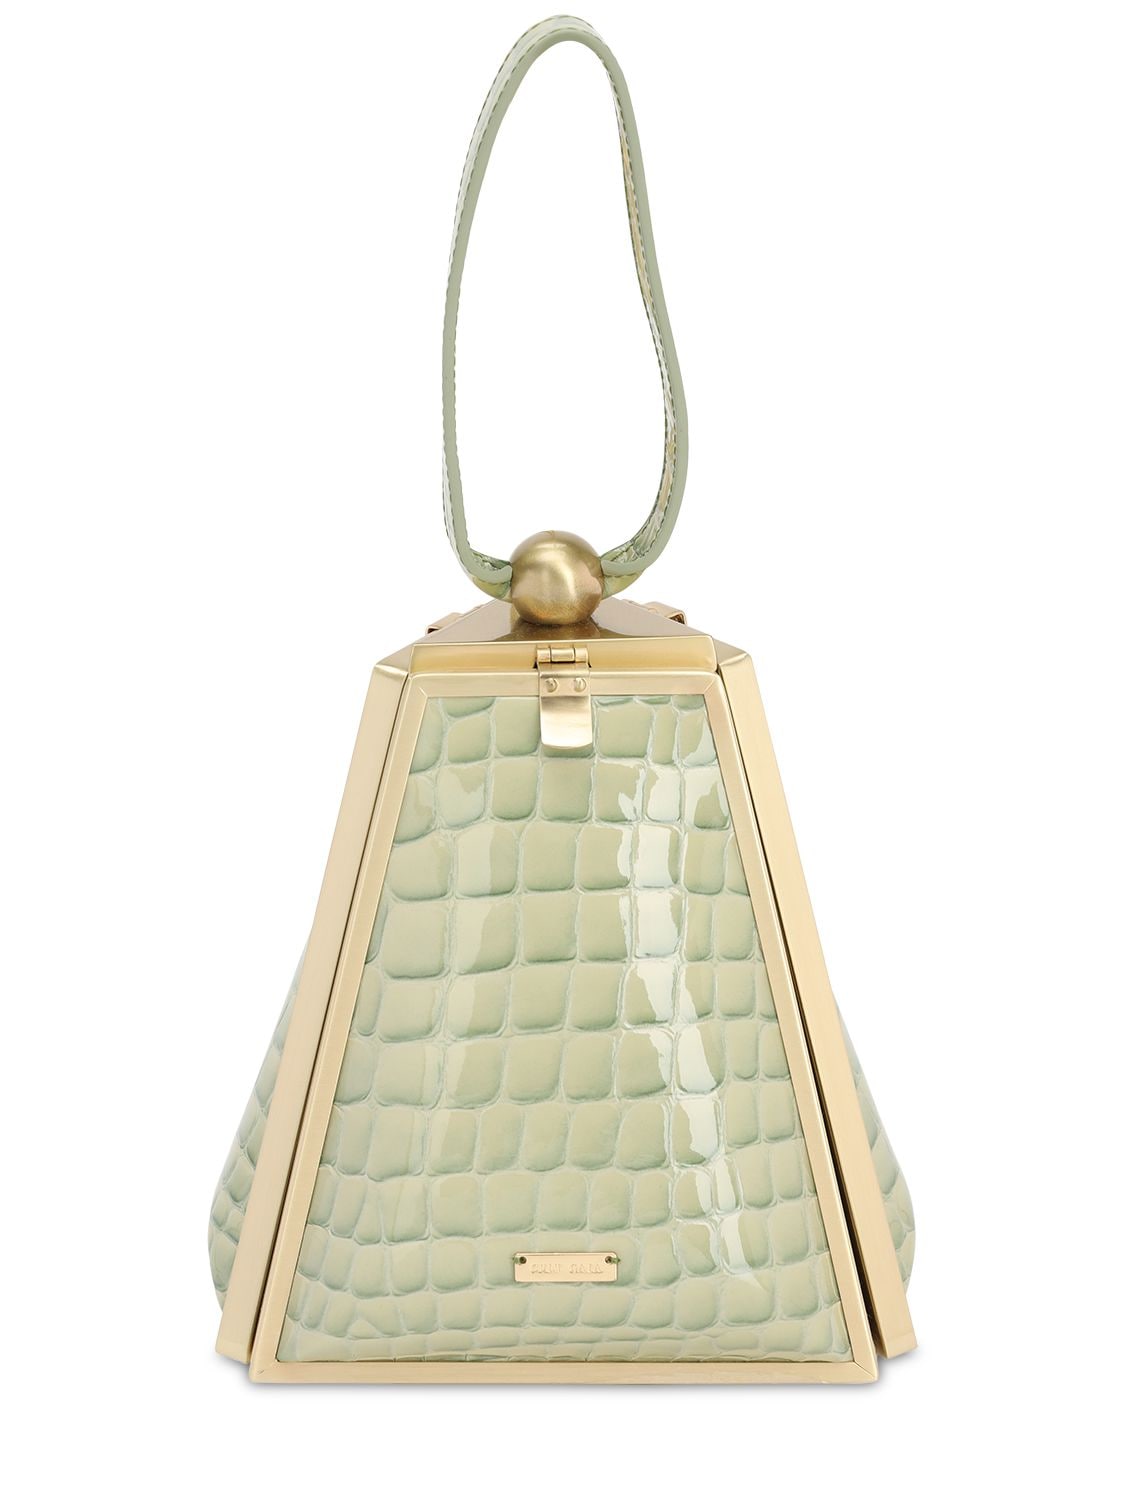 Cult Gaia Trina Croc Embossed Leather Bag In Surf